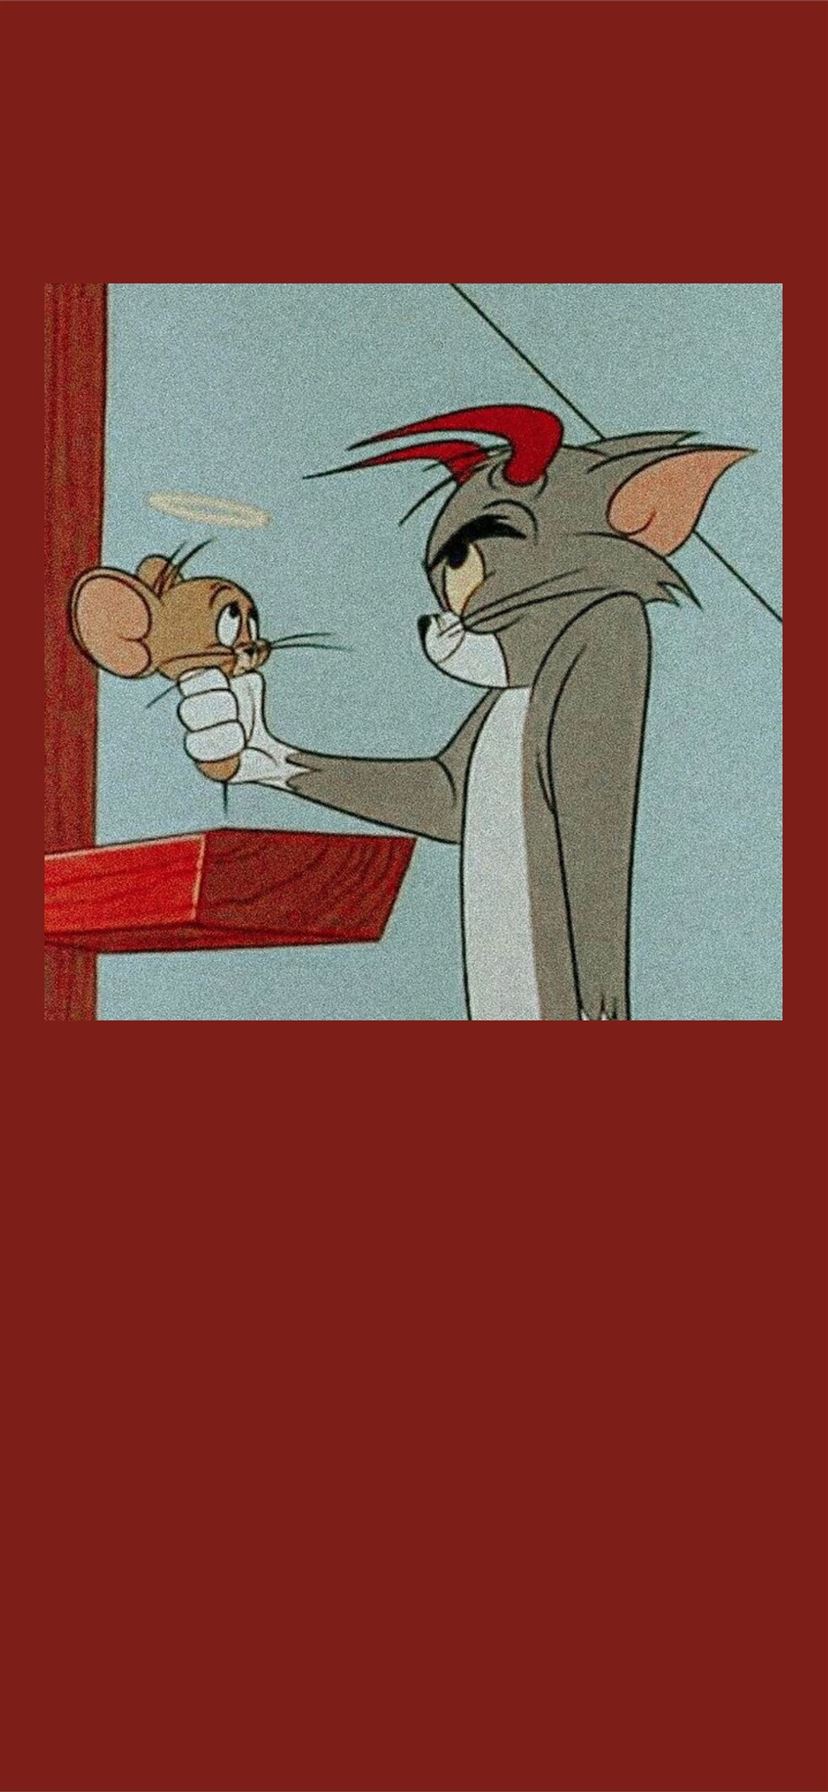 91 Best Tom and Jerry Wallpapers ideas  tom and jerry wallpapers tom and  jerry tom and jerry cartoon